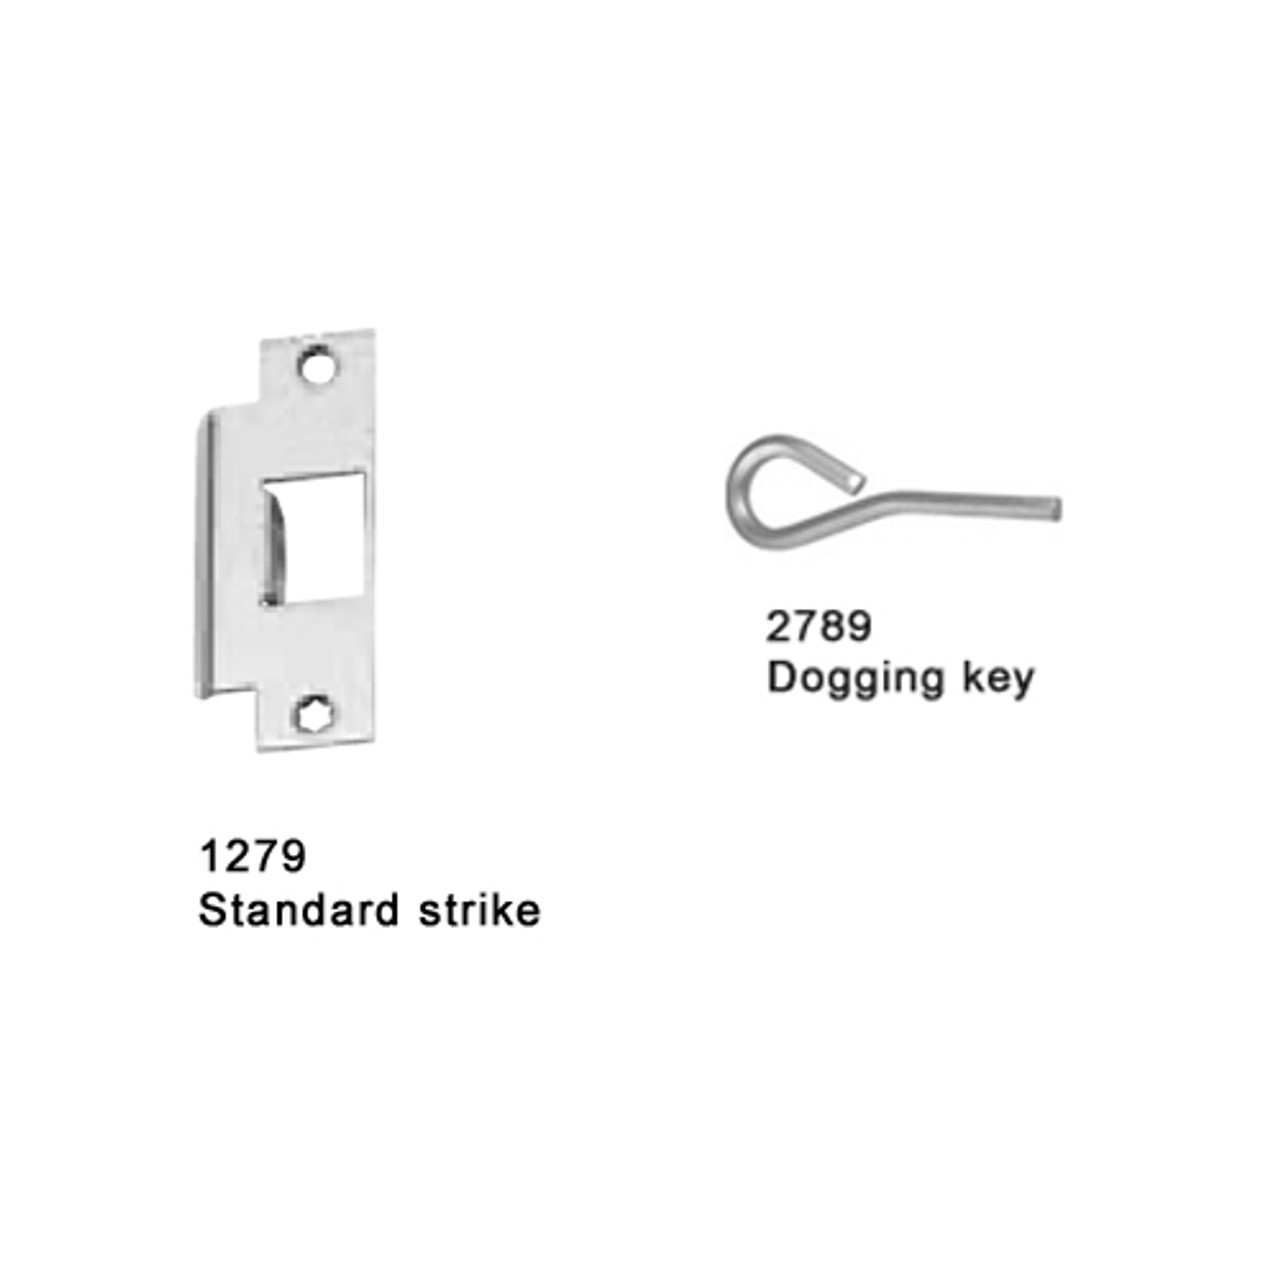 25-M-TP-BE-US28-4-RHR Falcon 25 Series Mortise Lock Devices 512TP-BE Thumbpiece Trim with Blank Escutcheon in Anodized Aluminum